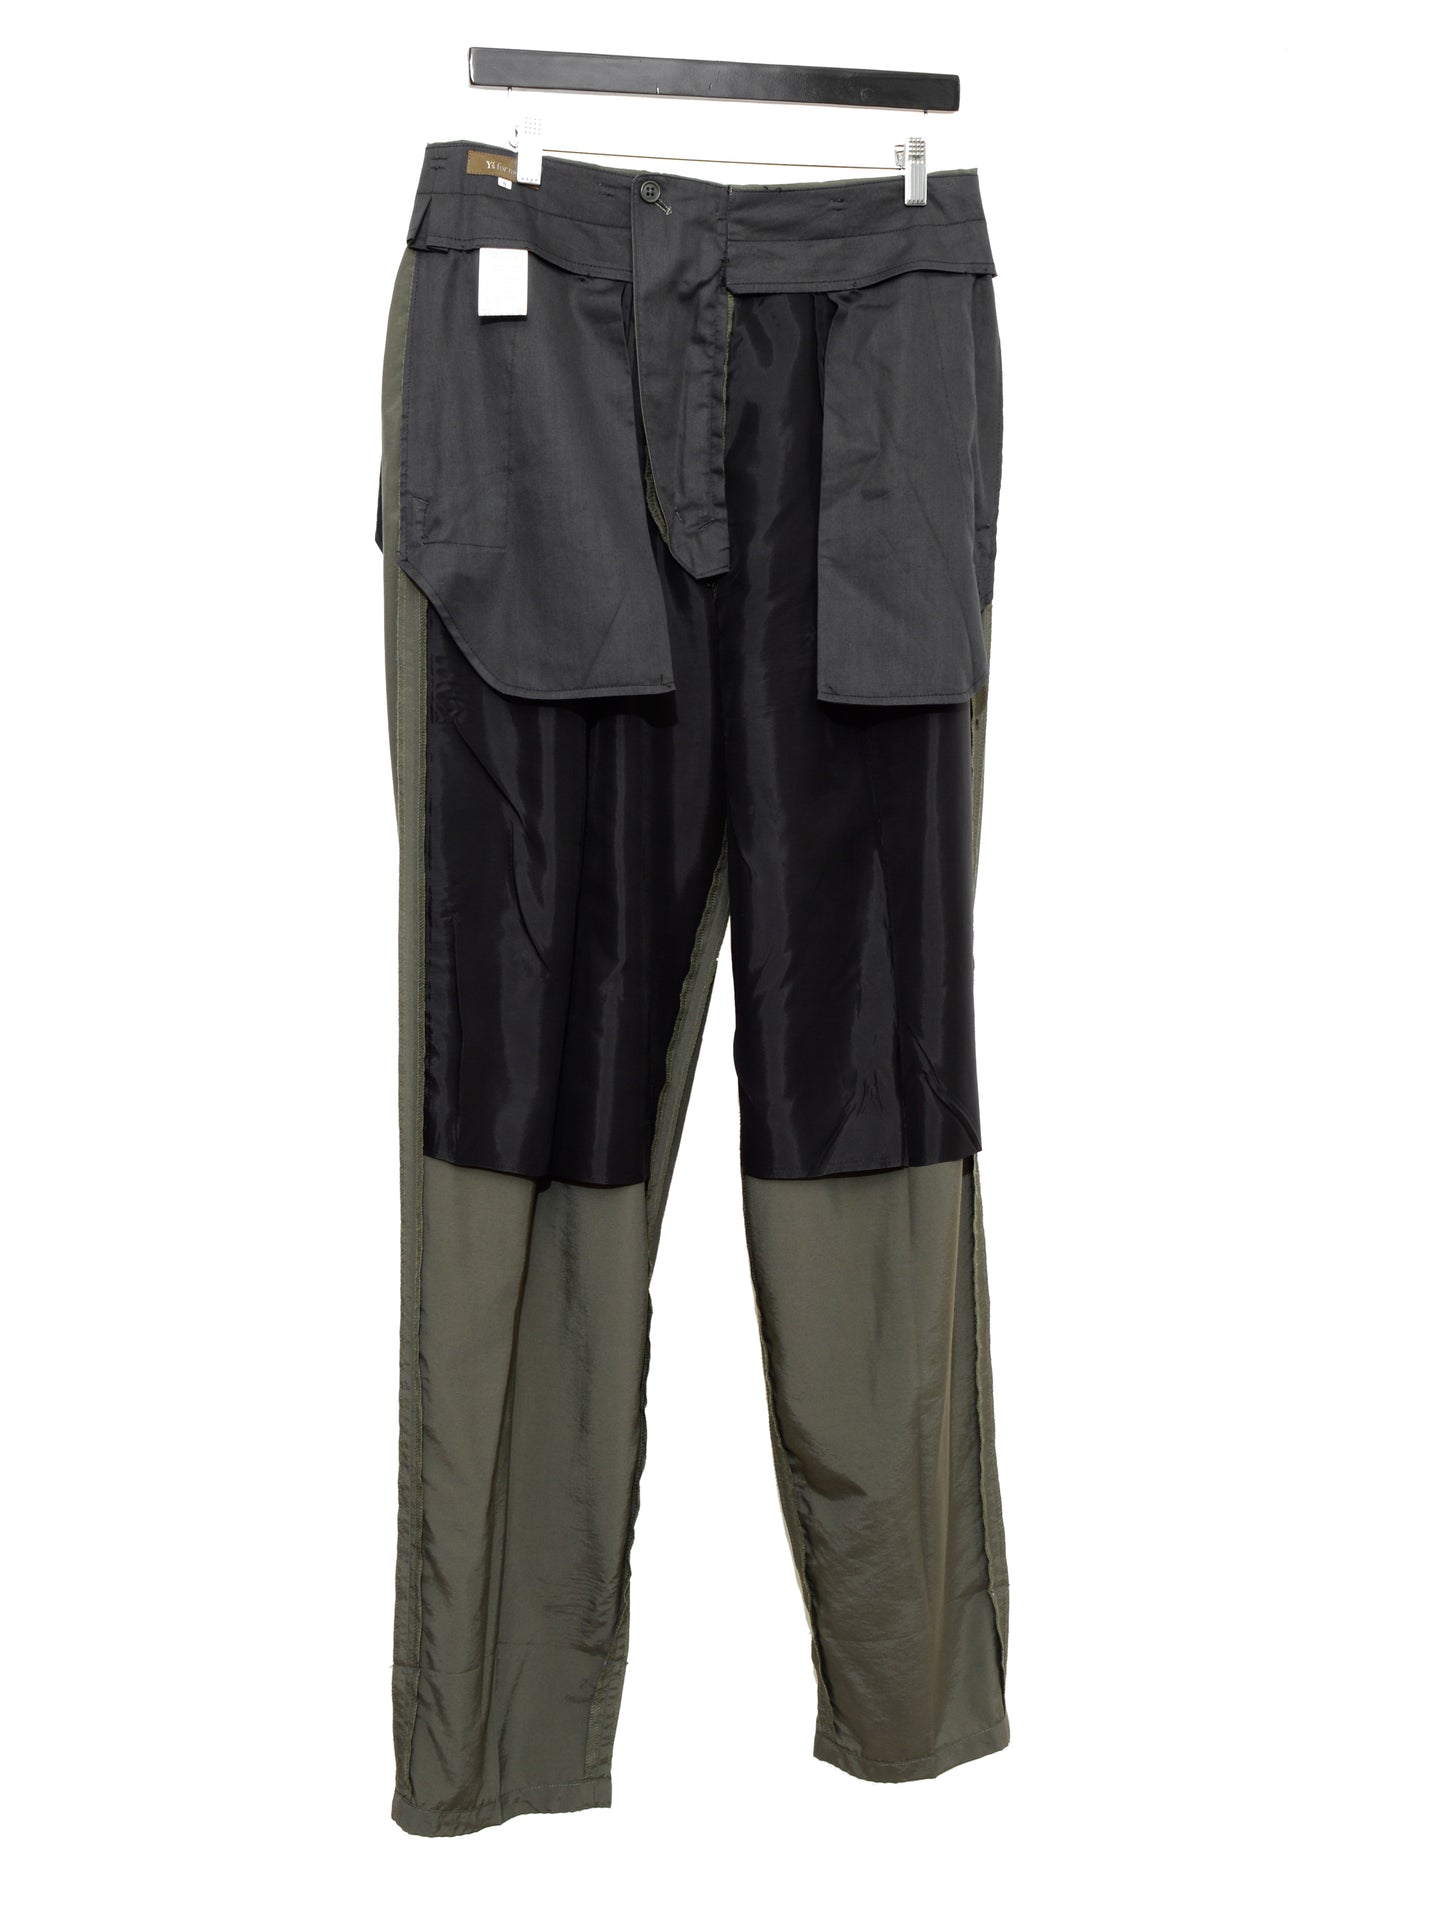 double pleat trousers olive ∙ rayon nylon ∙ small